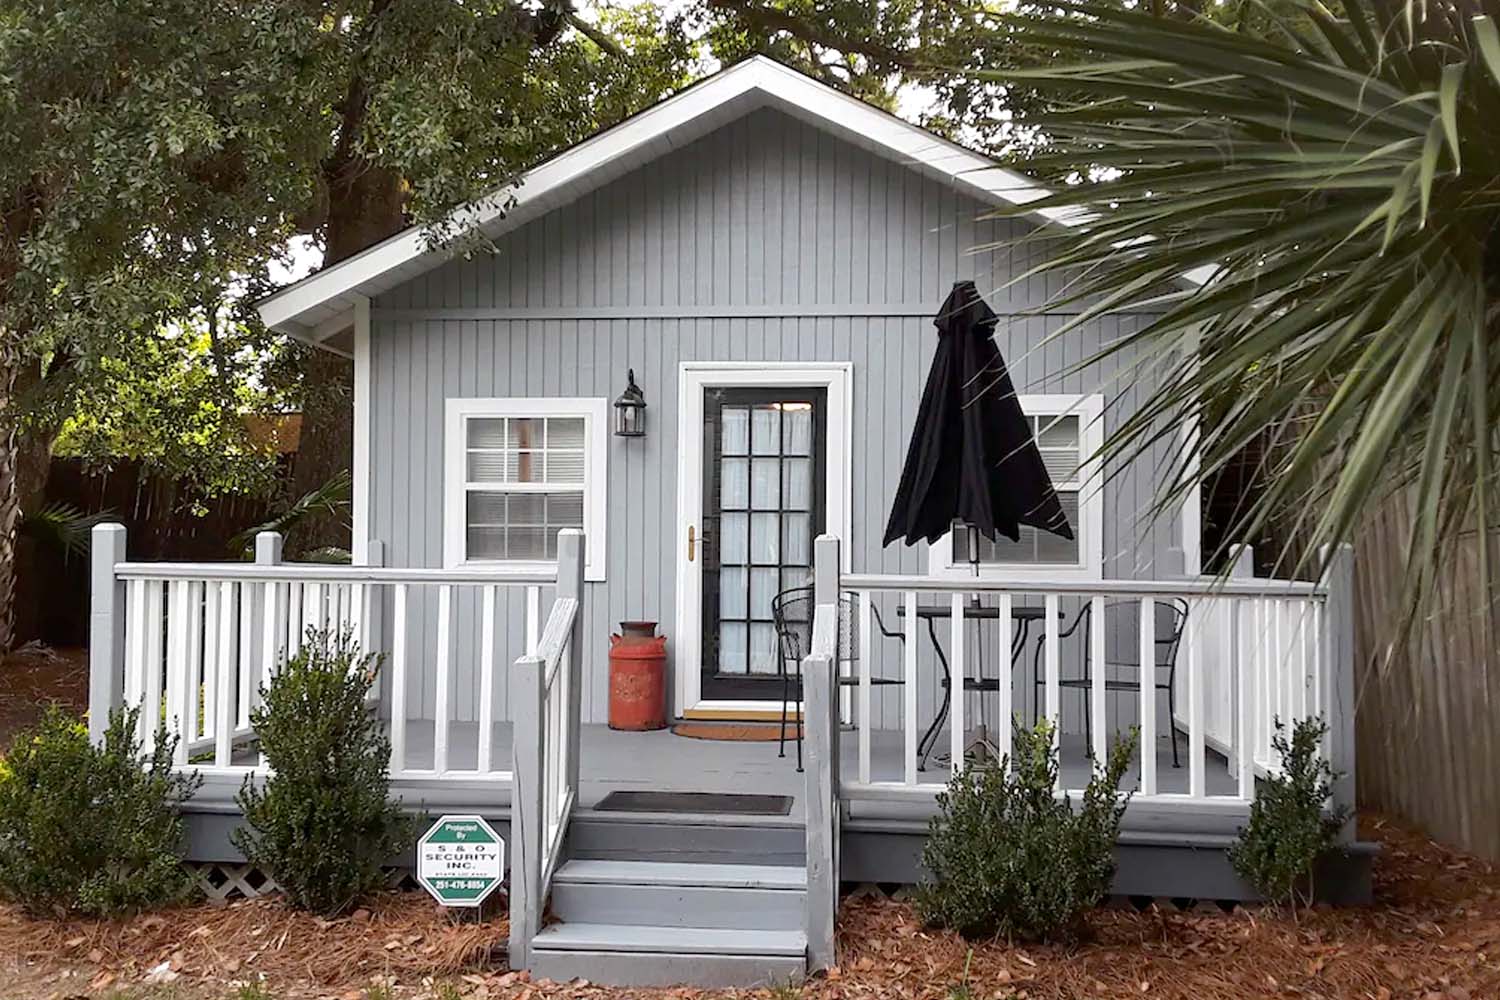 Guesthouse in Mobile, Alabama, USA